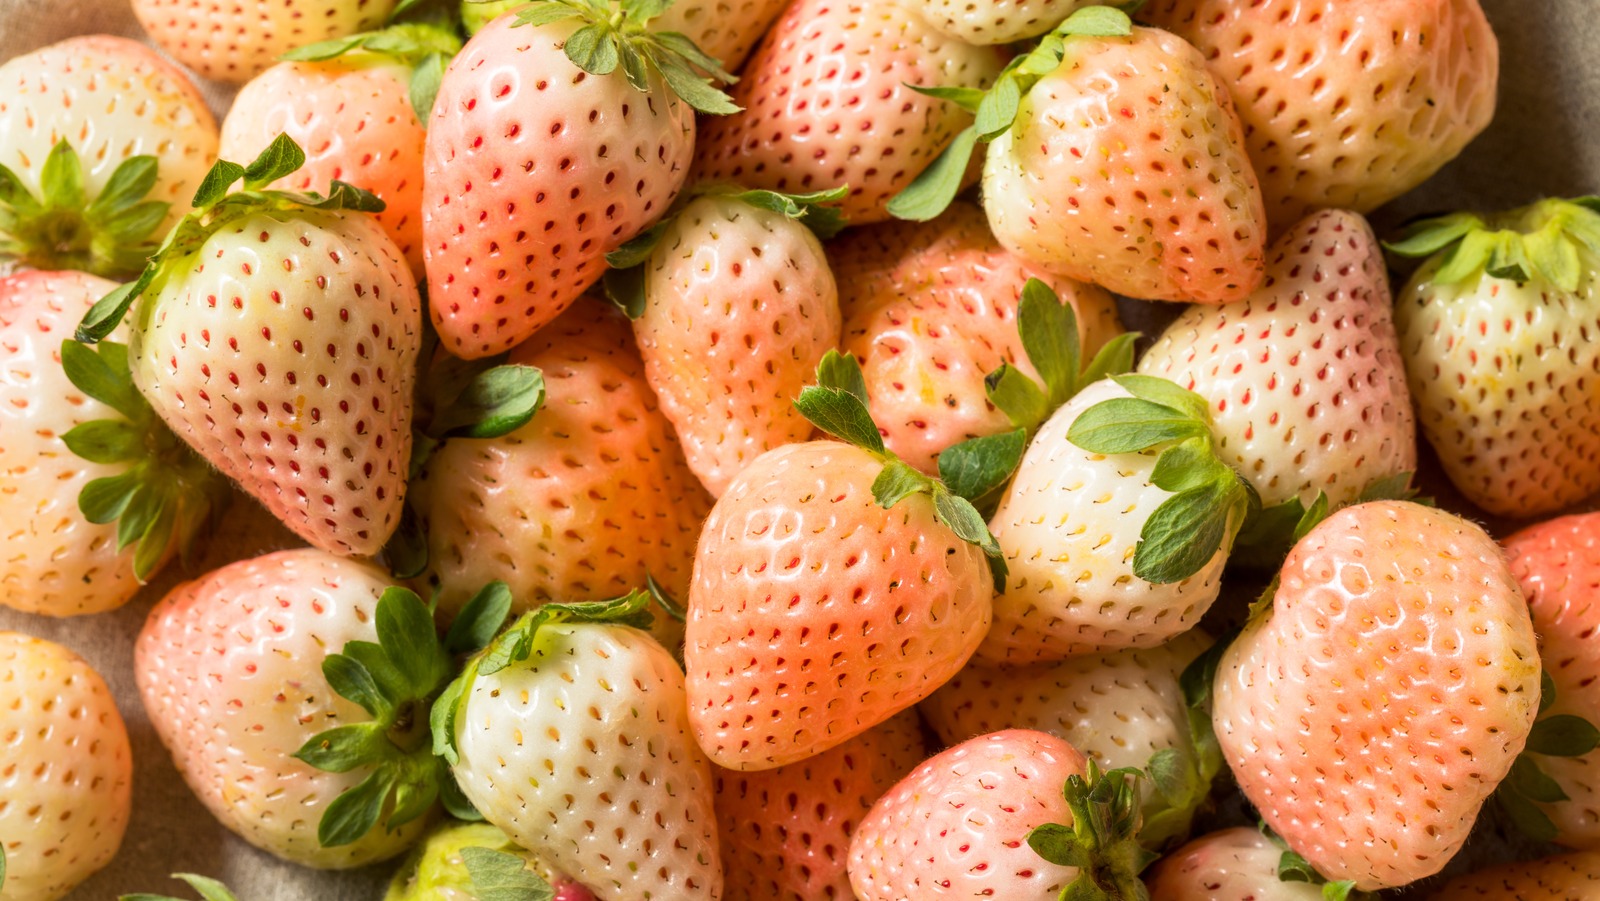 The Pale Pink Strawberry Variety With A Slightly Tropical Flavor